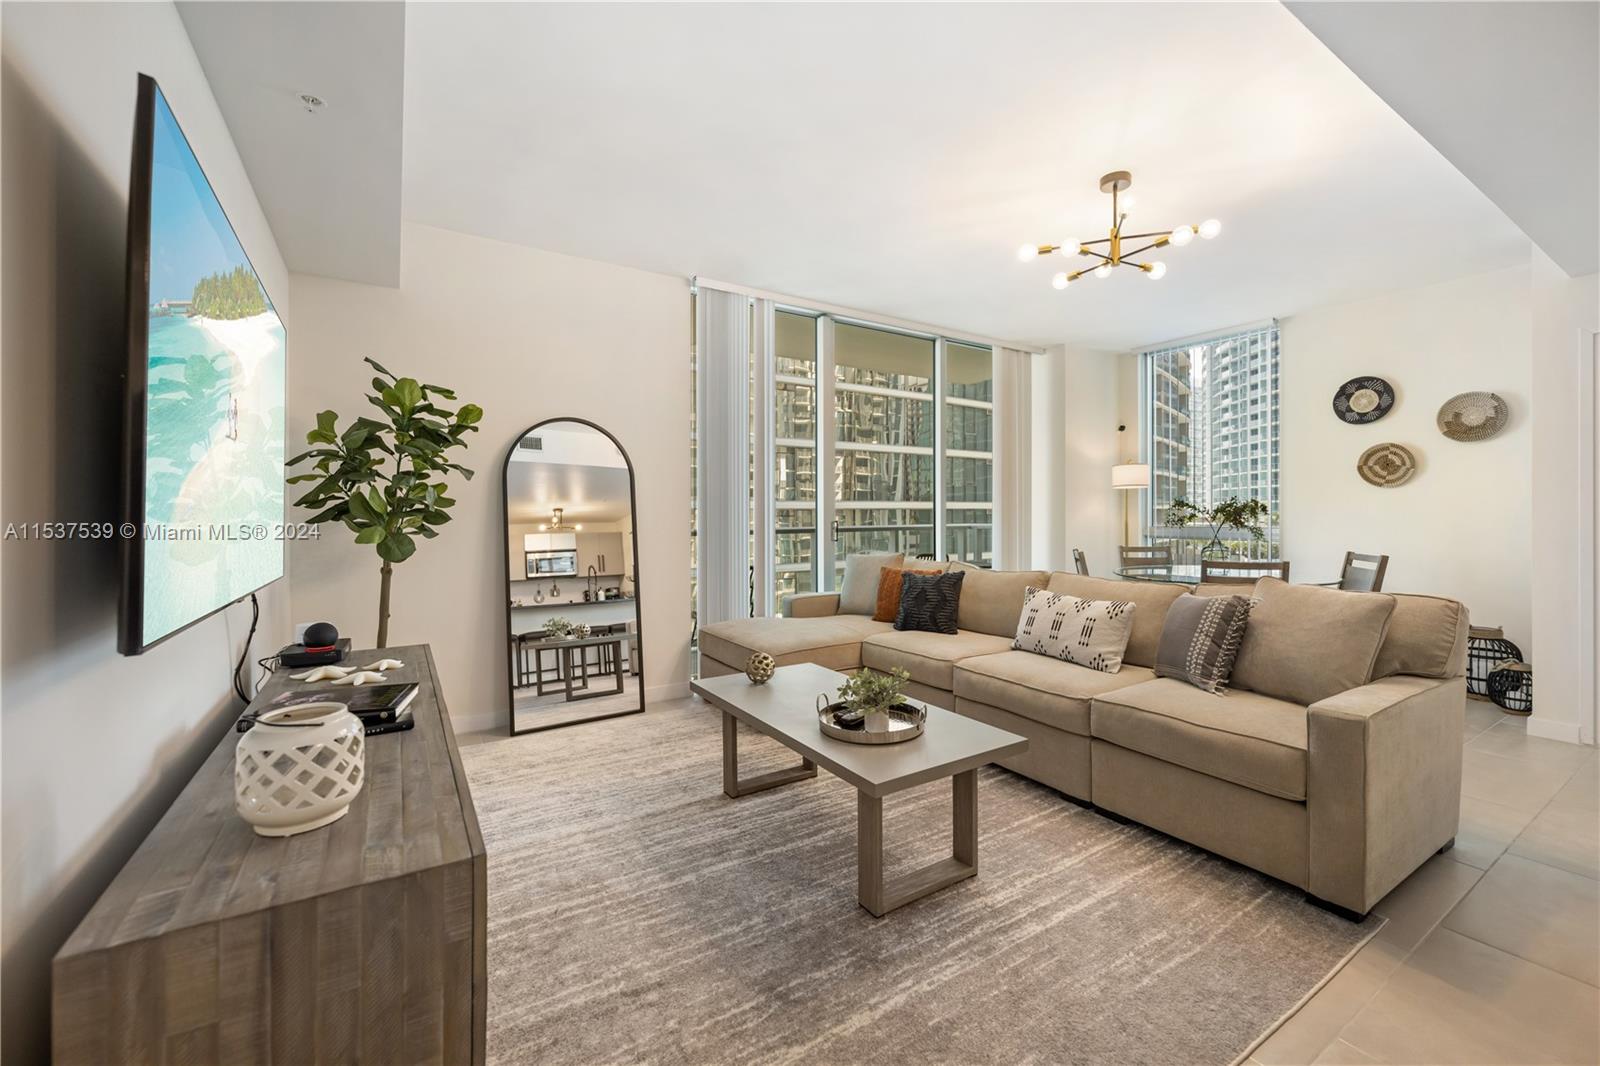 This 2-bedroom split plan corner unit in the heart of downtown is fully furnished and recently updated with Italian Cabinetry, Stainless Steel Appliances, Granite Countertops, Washer & Dryer and Walk-In Closets. Met One has an amazing Gym and Club Room! Please note that the pool will be closed for an extended period of time. Water, basic cable and Internet included. One assigned parking space. Walk to Whole Foods, Bayfront Park, Metro Mover and Novikov Restaurant downstairs, Joe & The Juice and 16-screen Silverspot Cinema at Met Square. Building offers luxurious life style, 24-hr front desk attended. Downtown Miami living at its best!